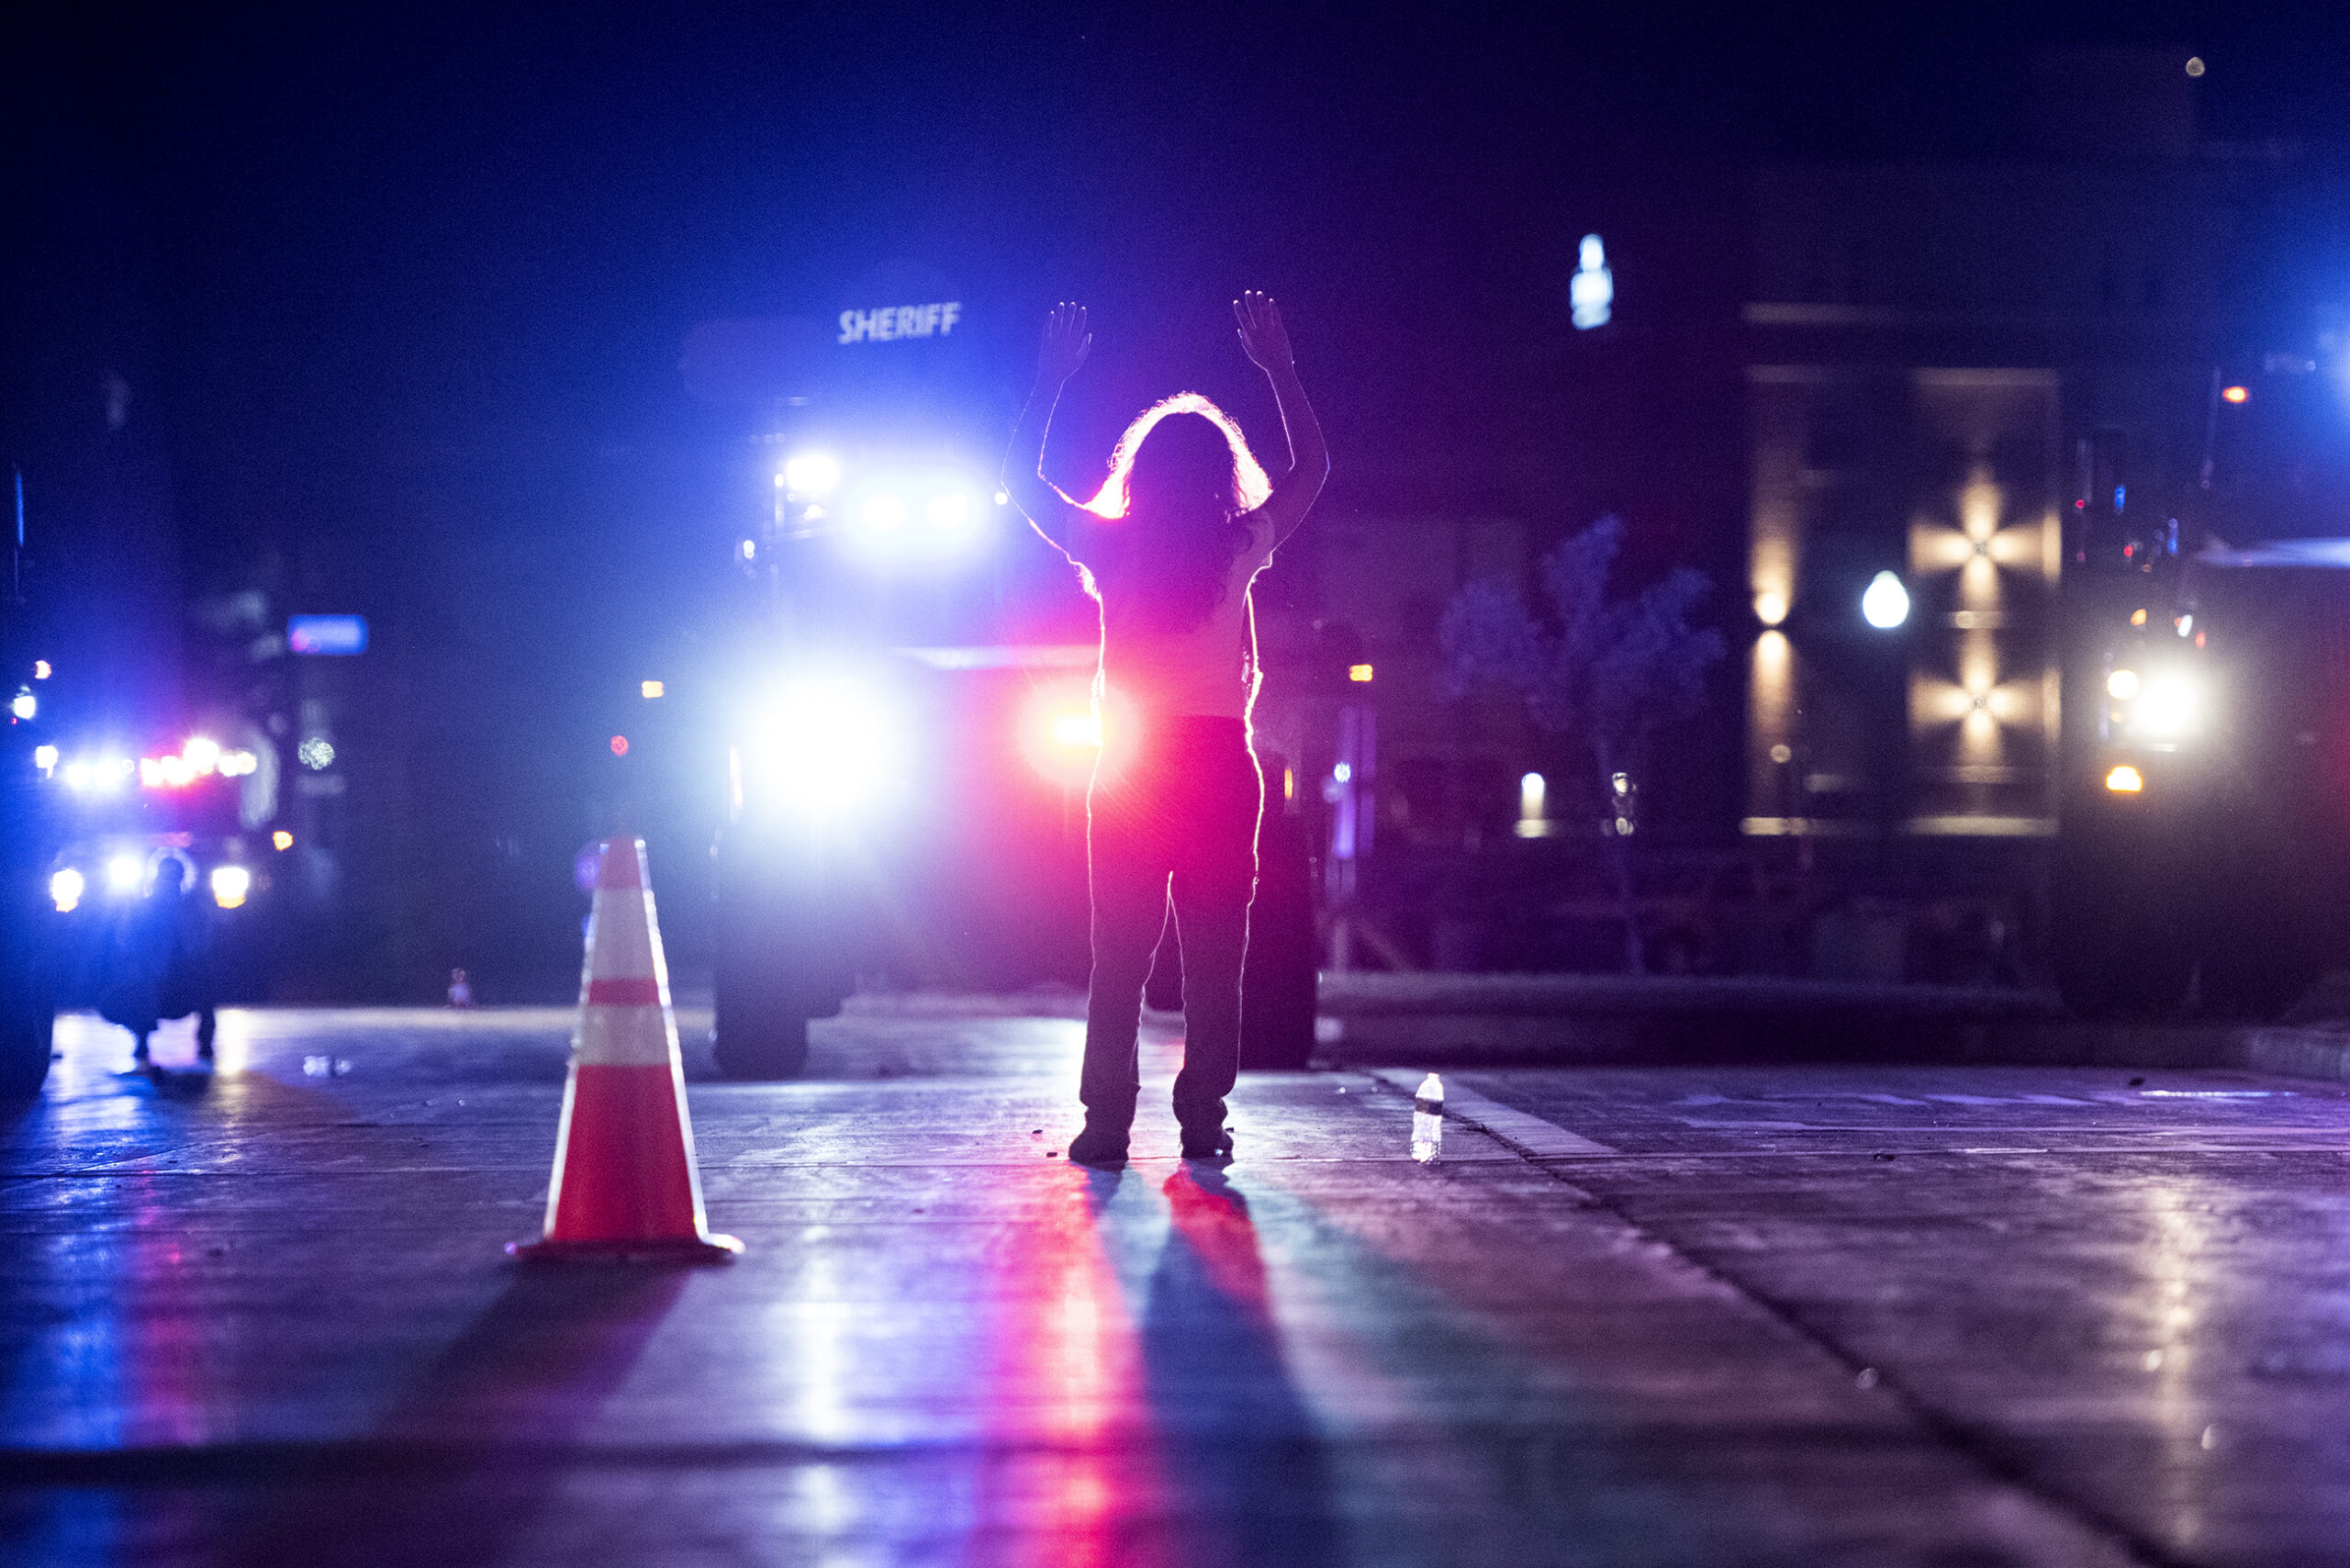 blue and red lights fill the night as a lone protester raises their arms in front of large law enforcement vehicles